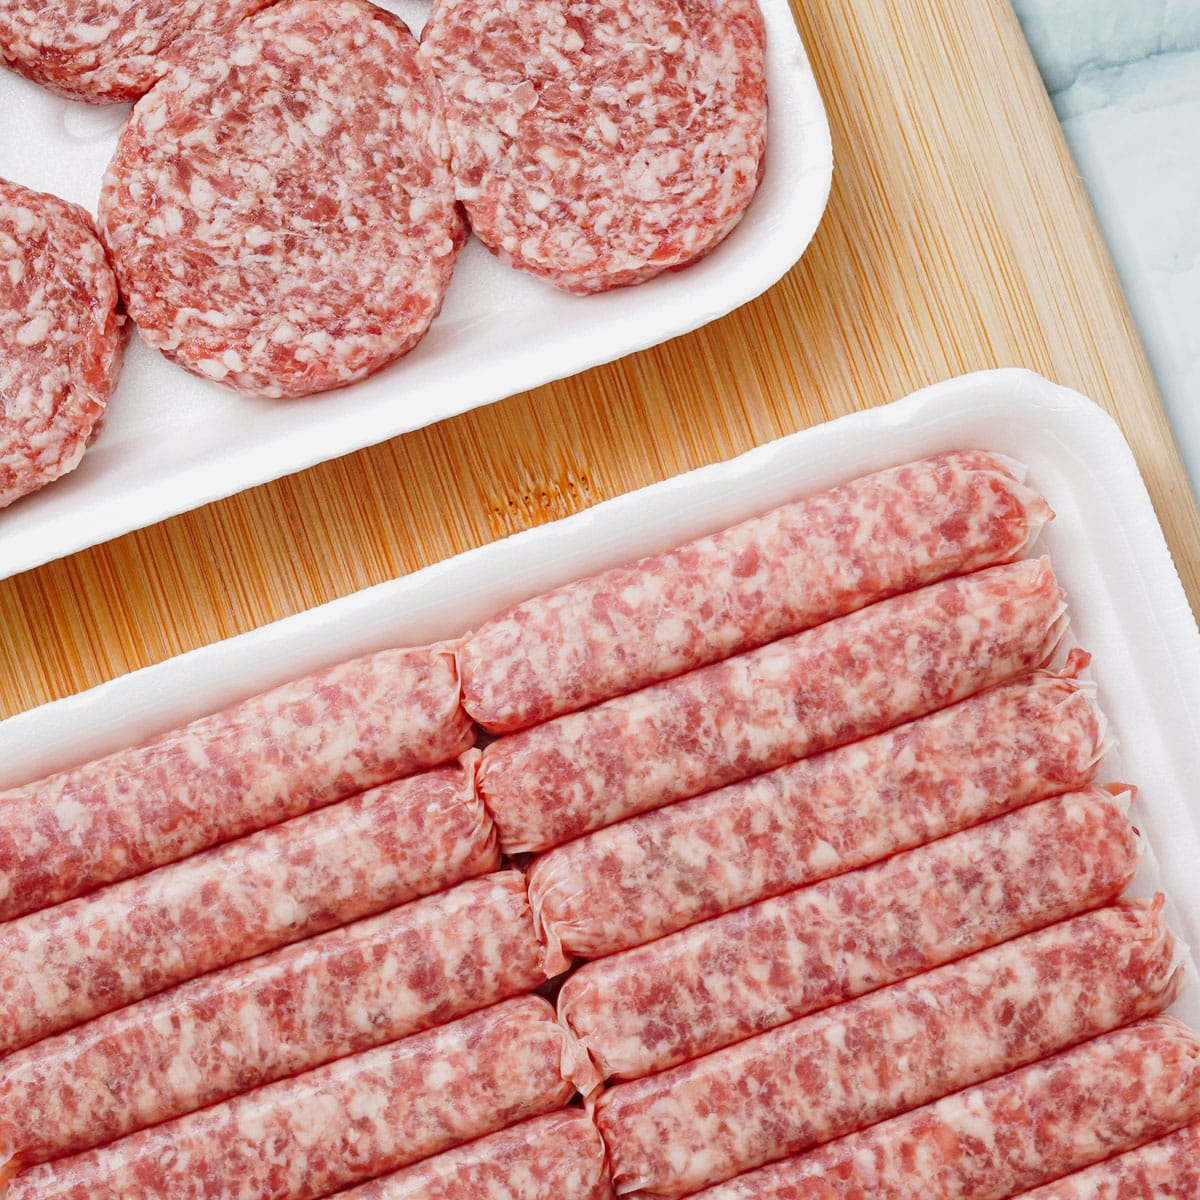 Uncooked breakfast sausage links and patties